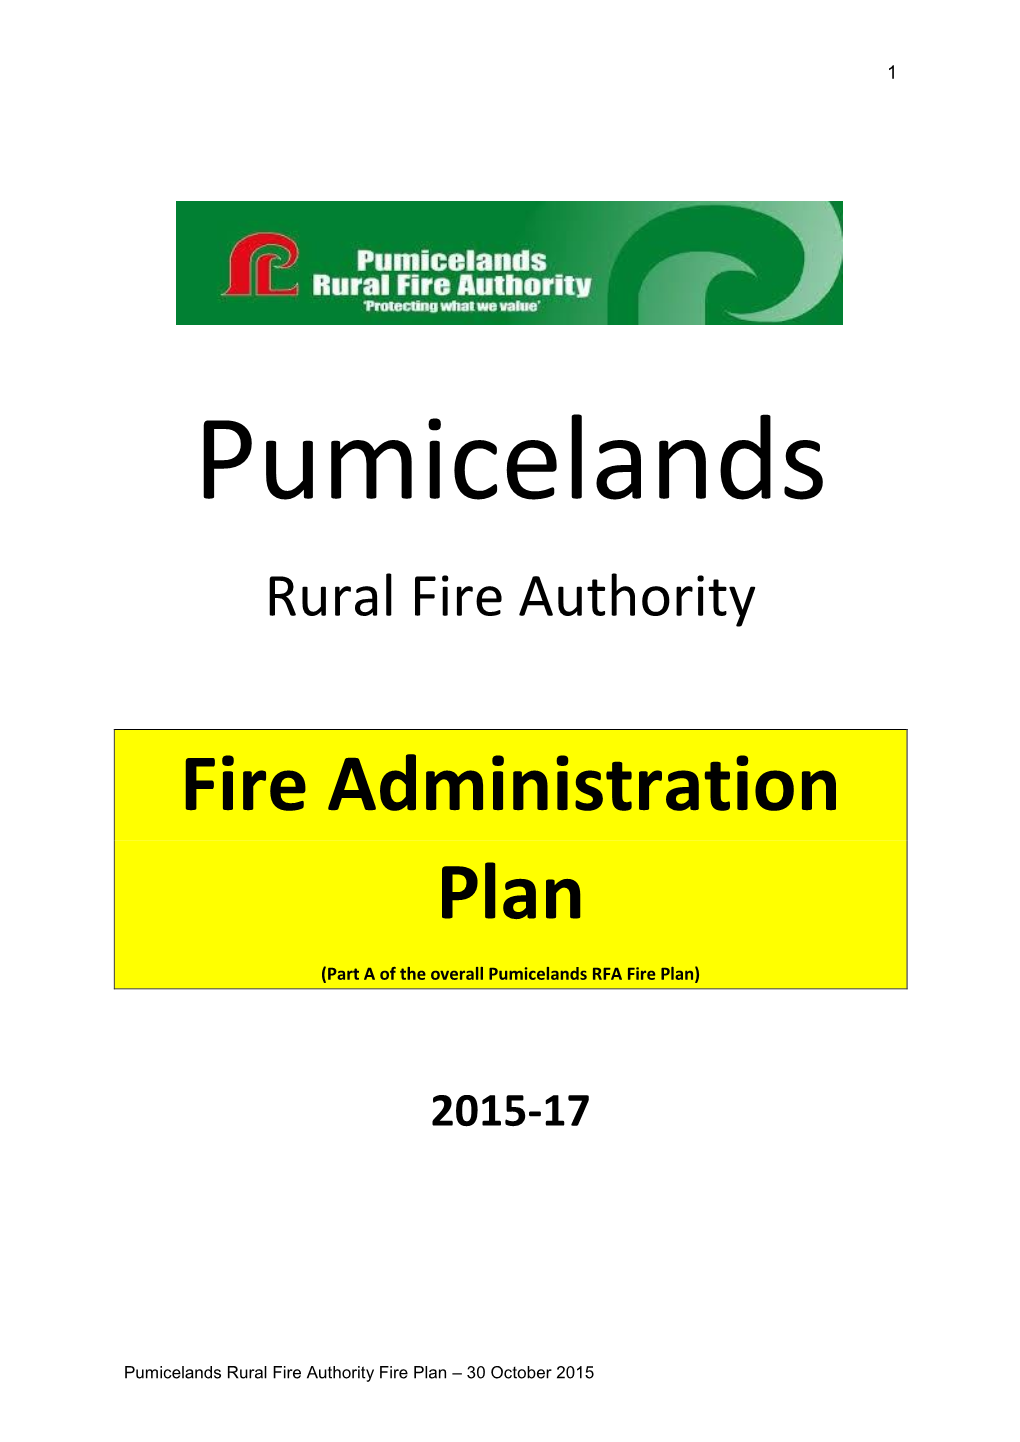 Pumicelands Rural Fire Authority